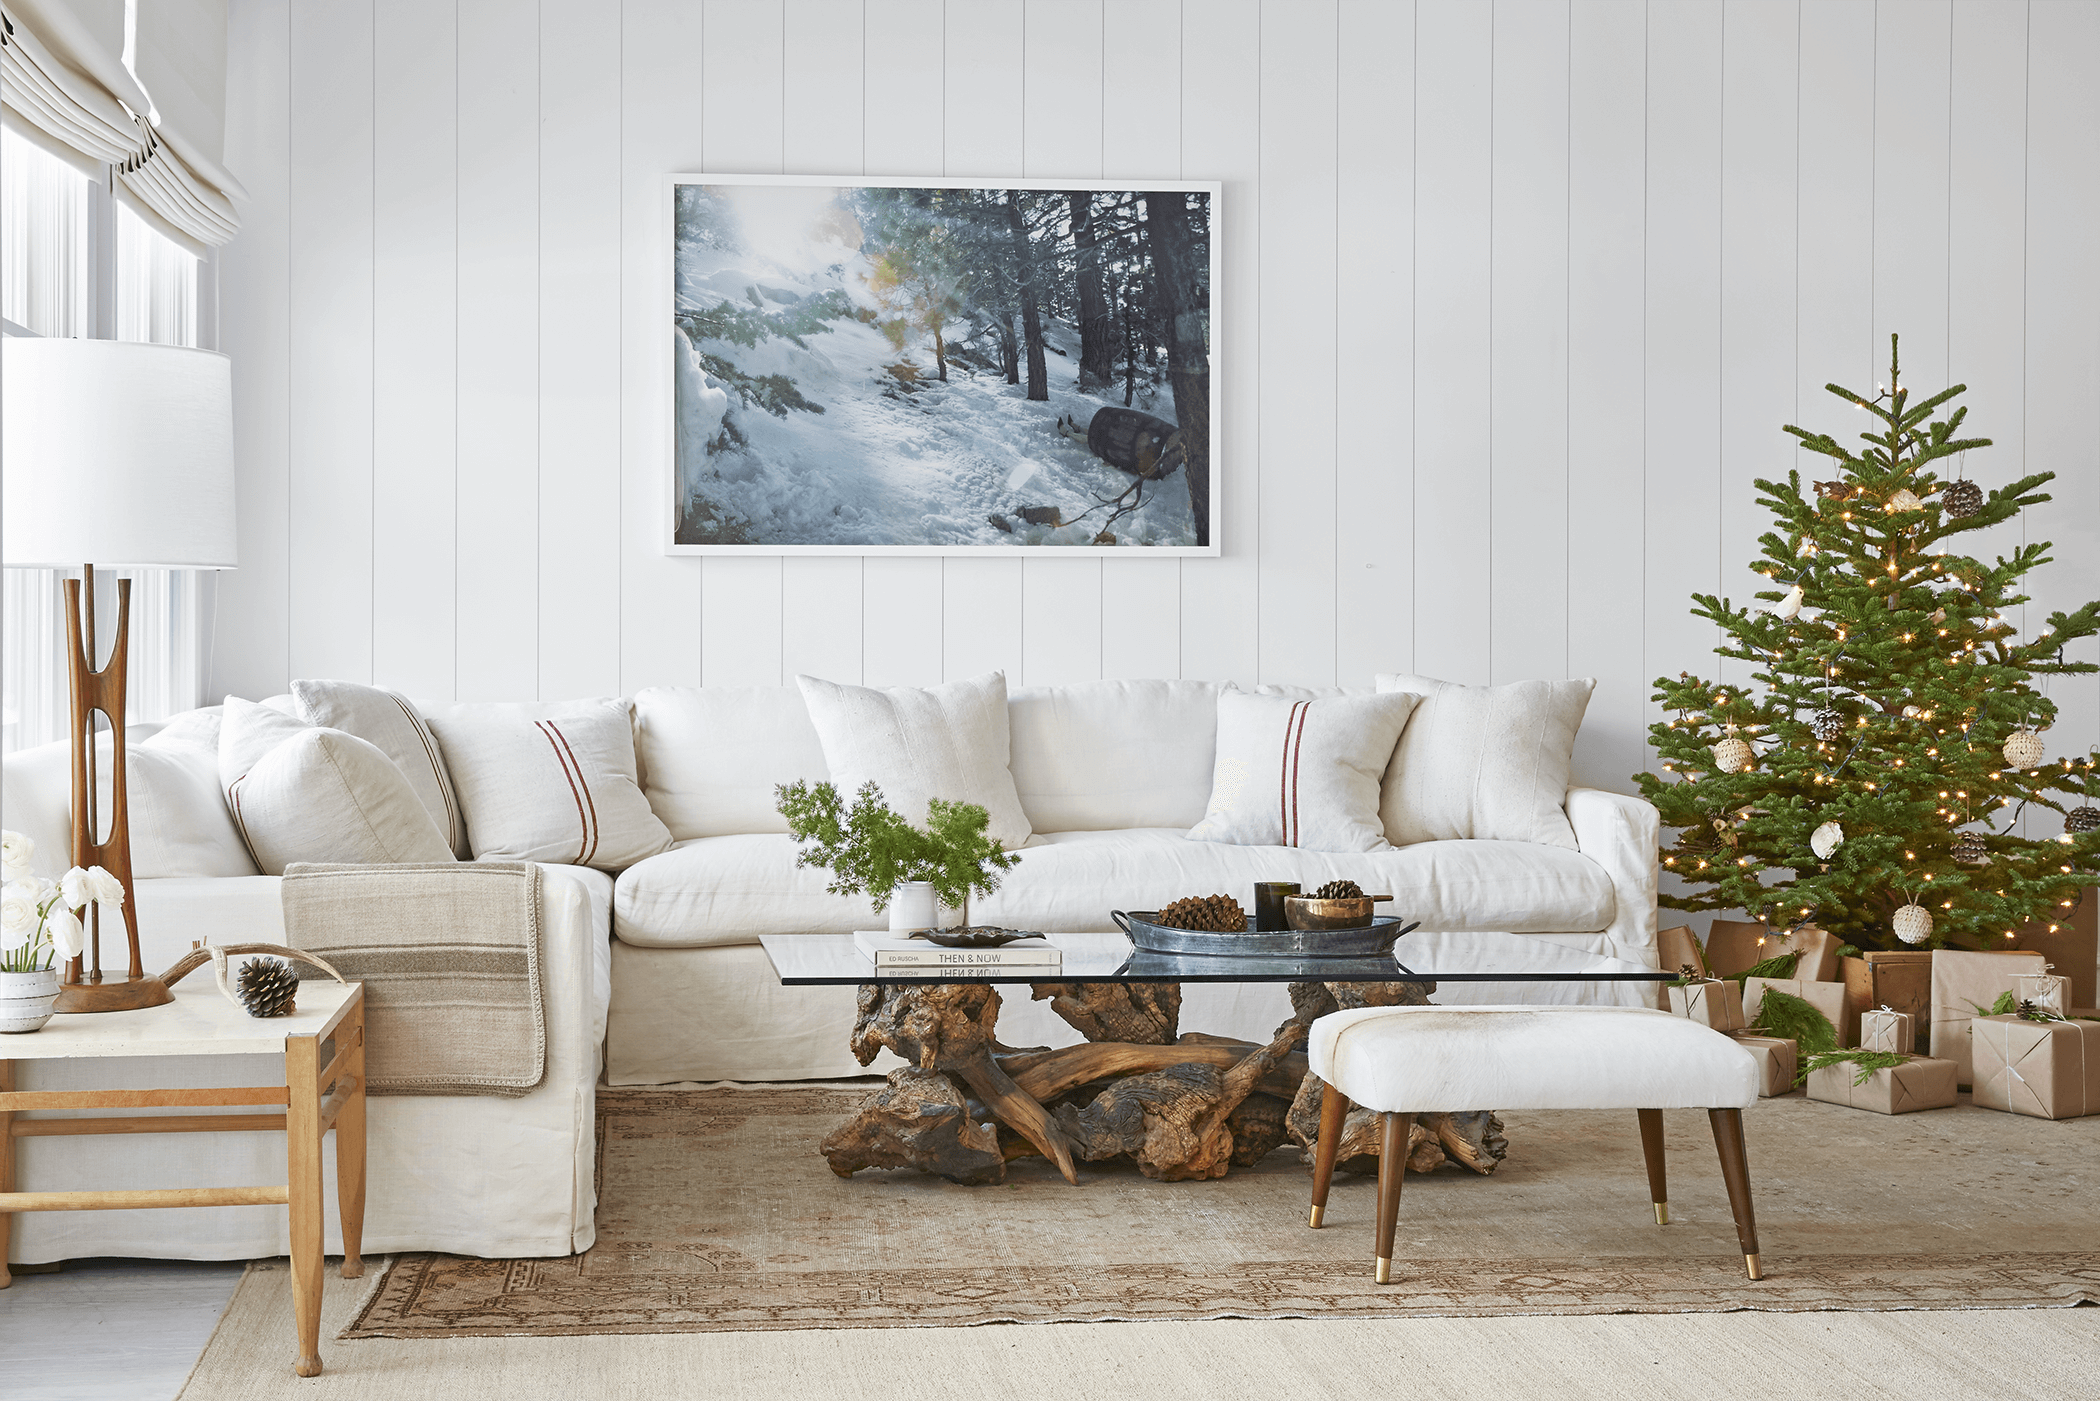 Cozy Up Your Living Room This Fall